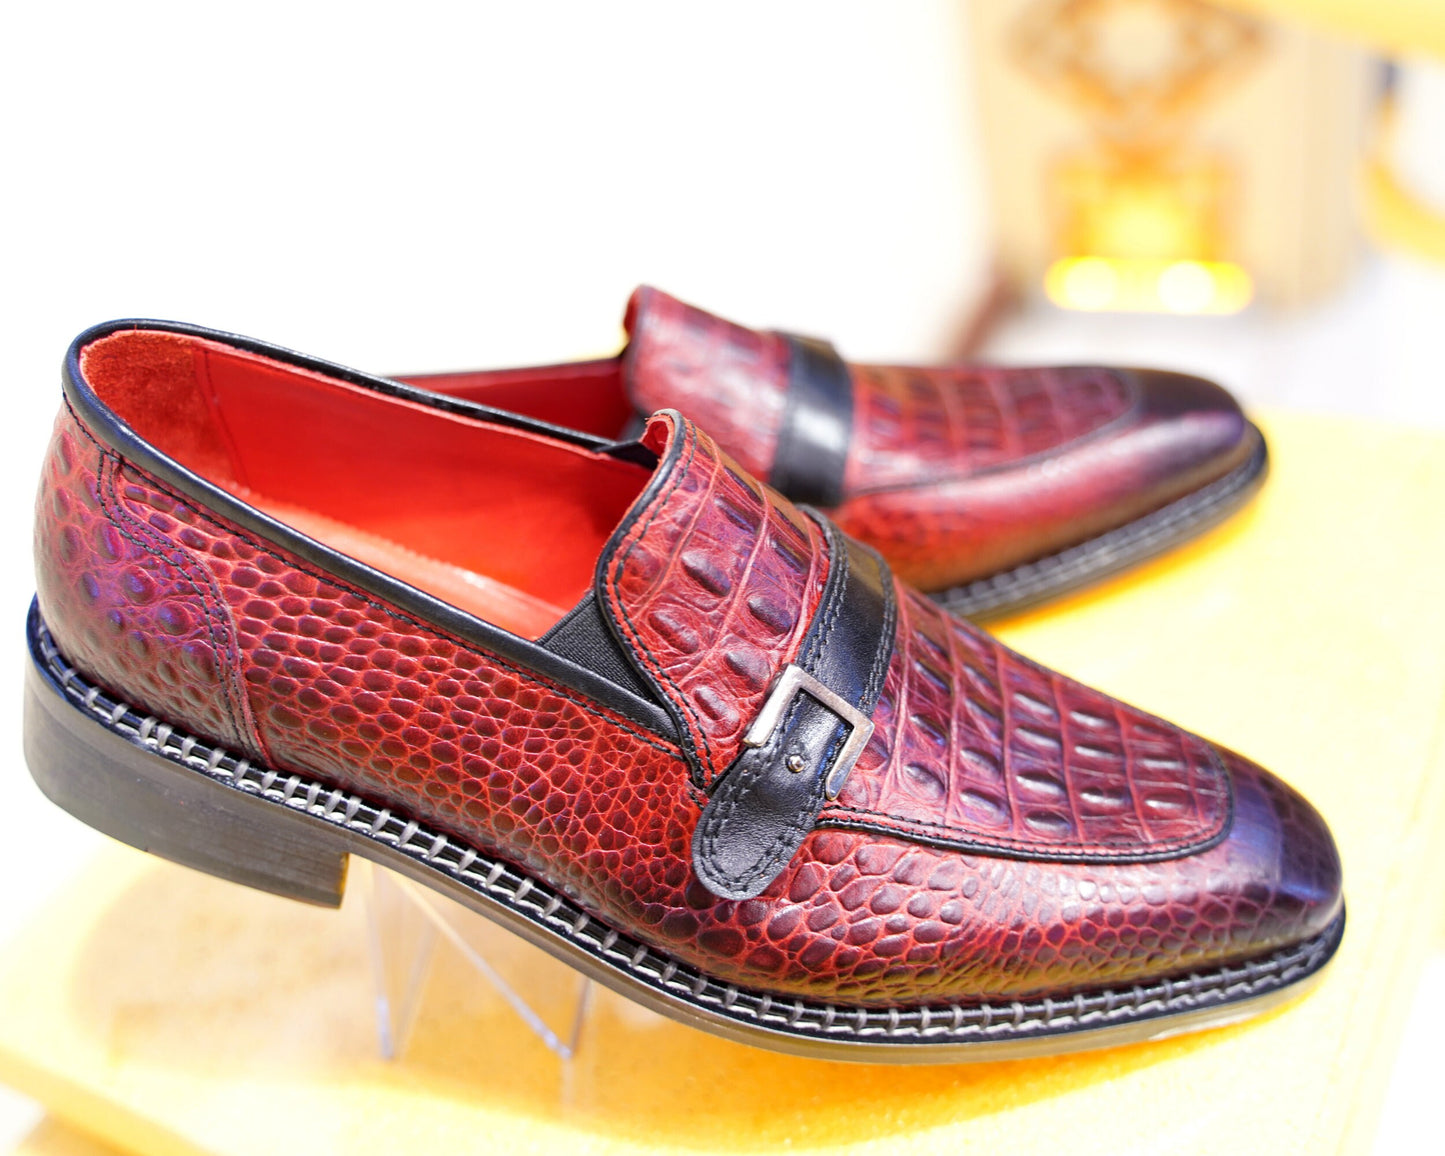 Red Alligator Leather Monk Strap Loafer For Men Premium Quality Made To Order Bespoke  Anniversary Valentine's Day Gift For Him Men